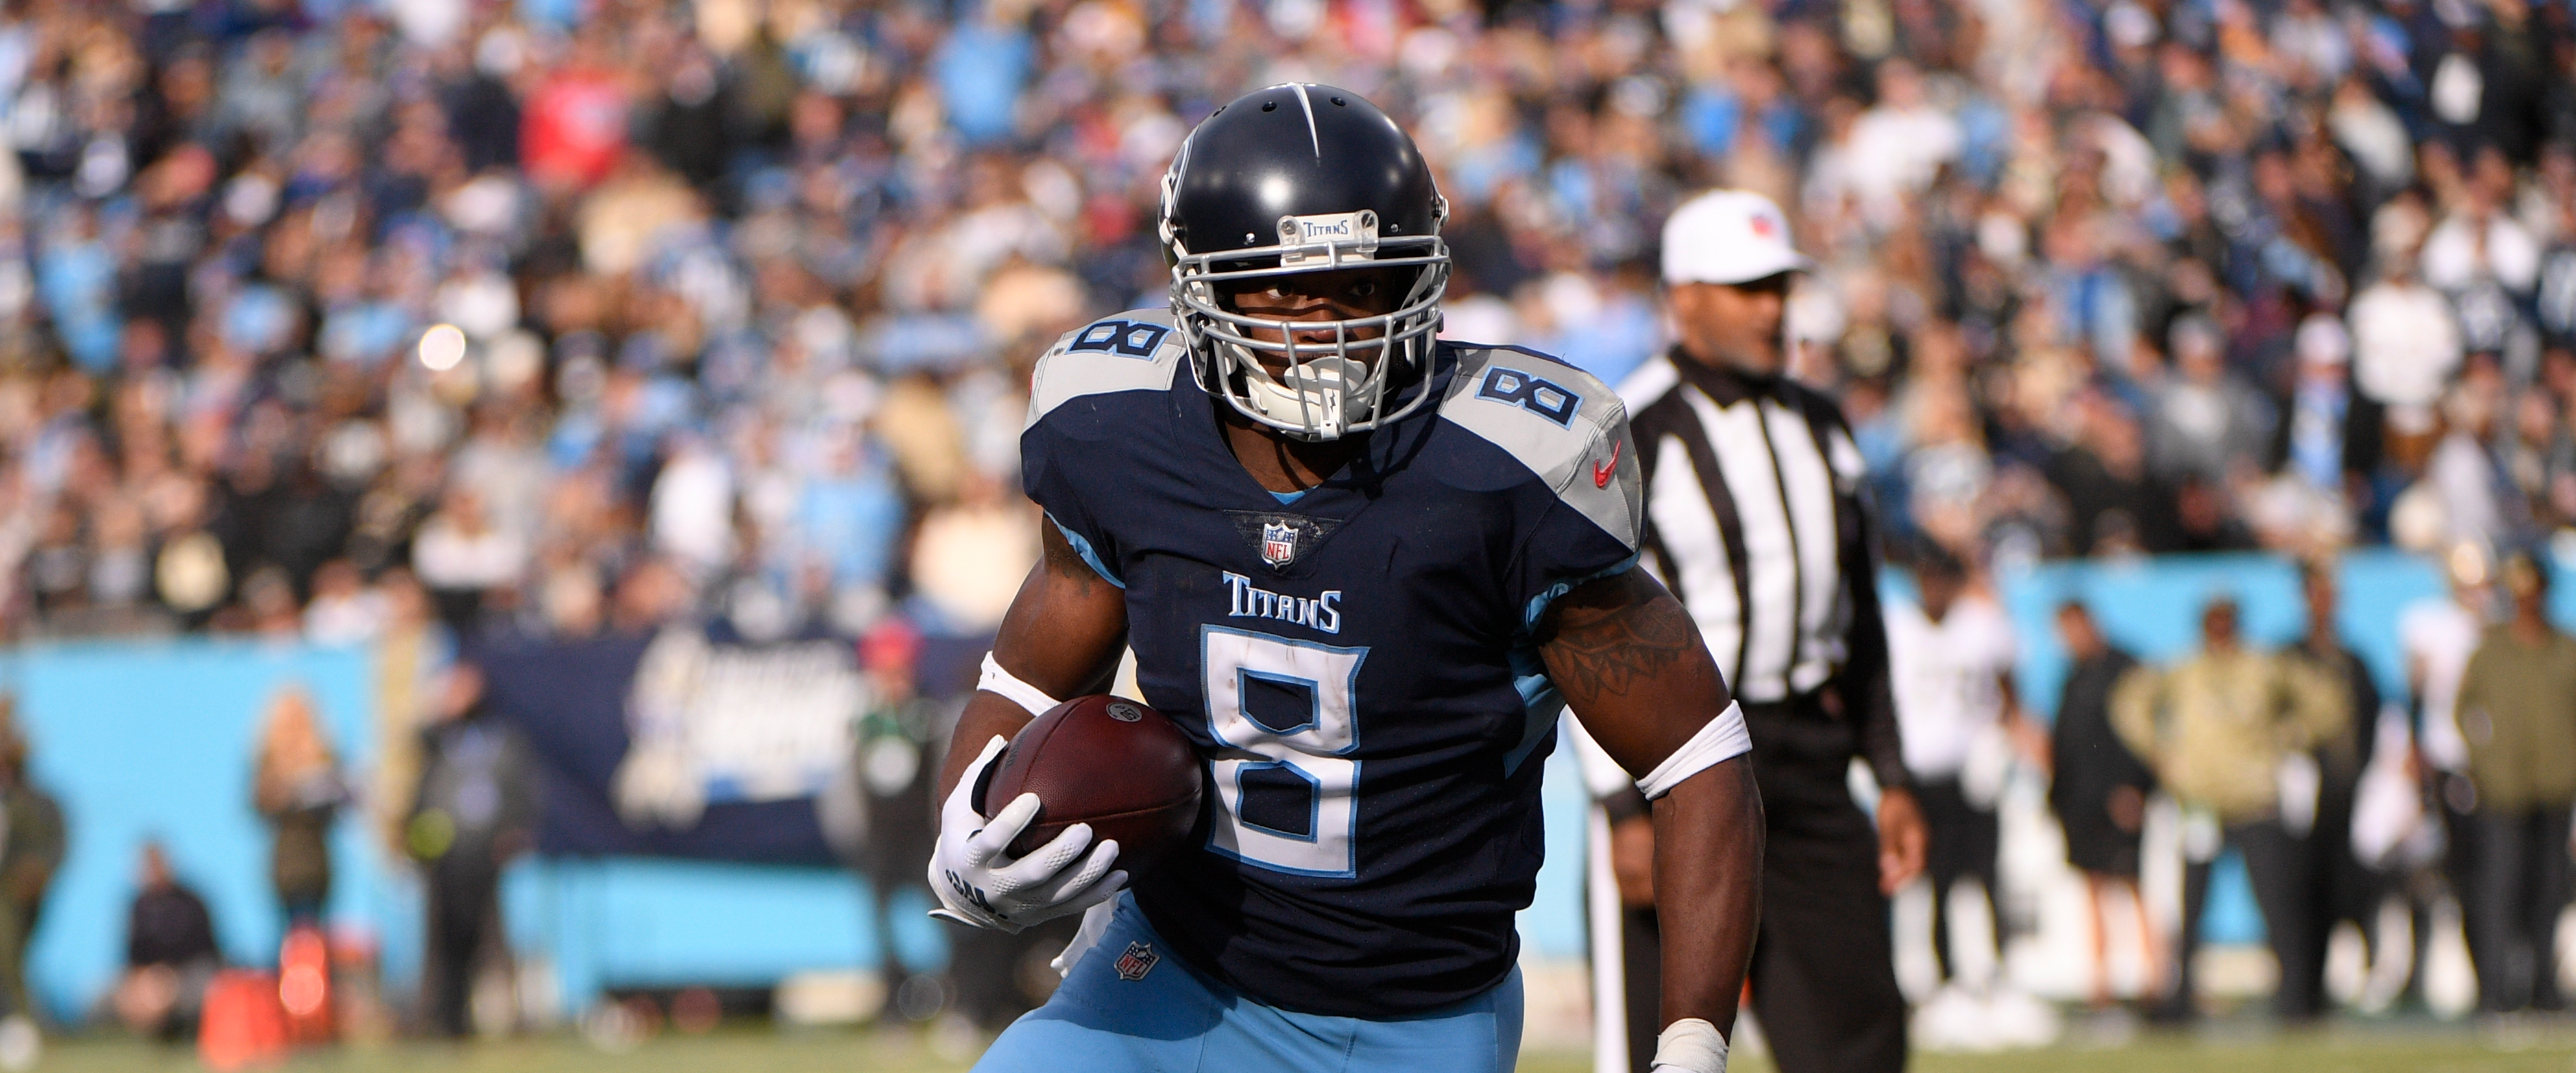 Titans: The Adrian Peterson experiment failed, but that's okay